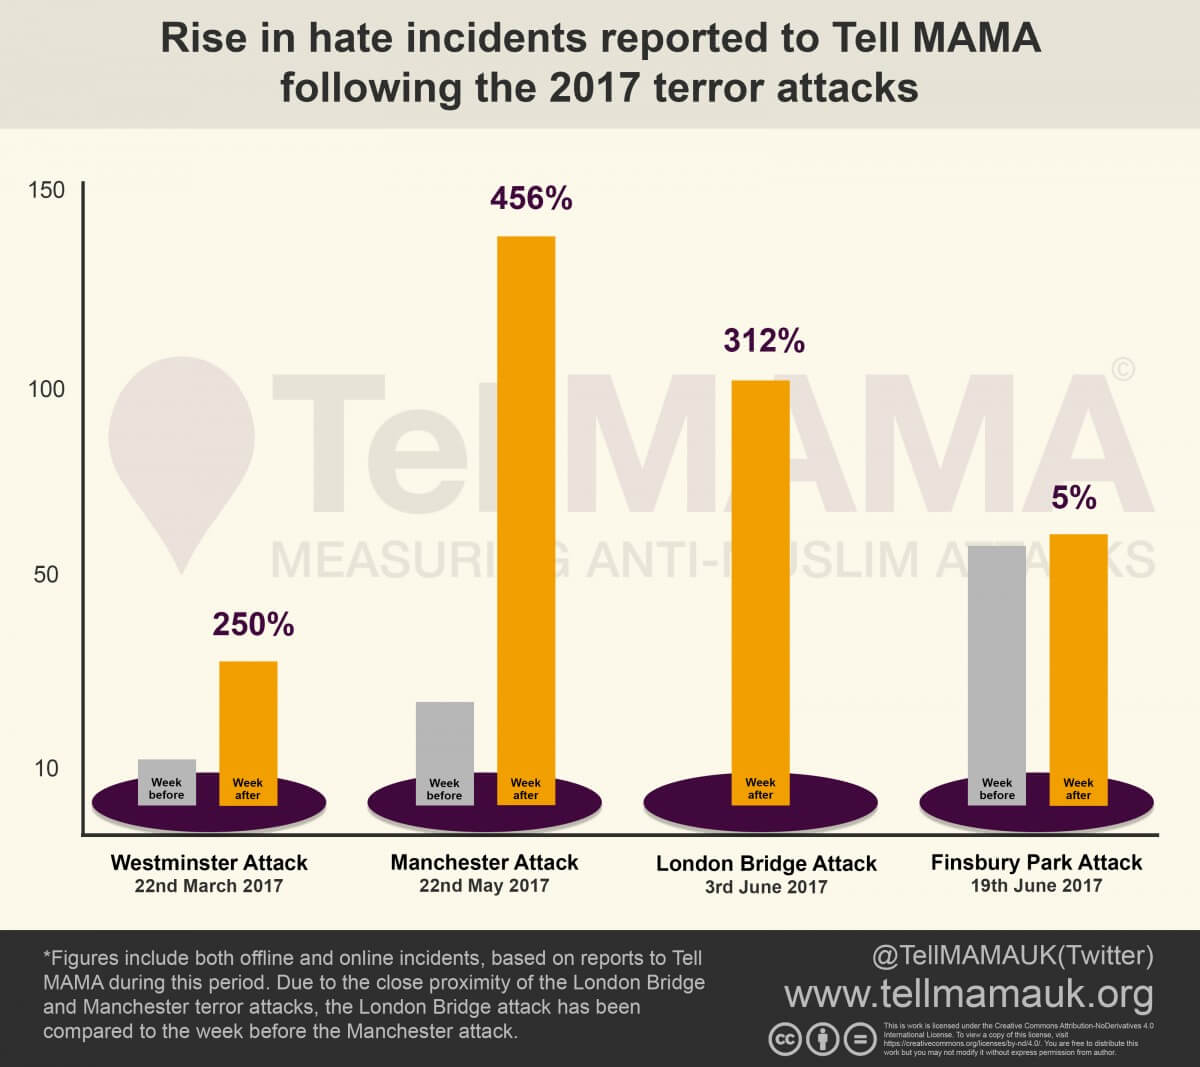 Anti-Muslim Hatred, Terrorism, Media Sources, Far Right Networks & Spike Points